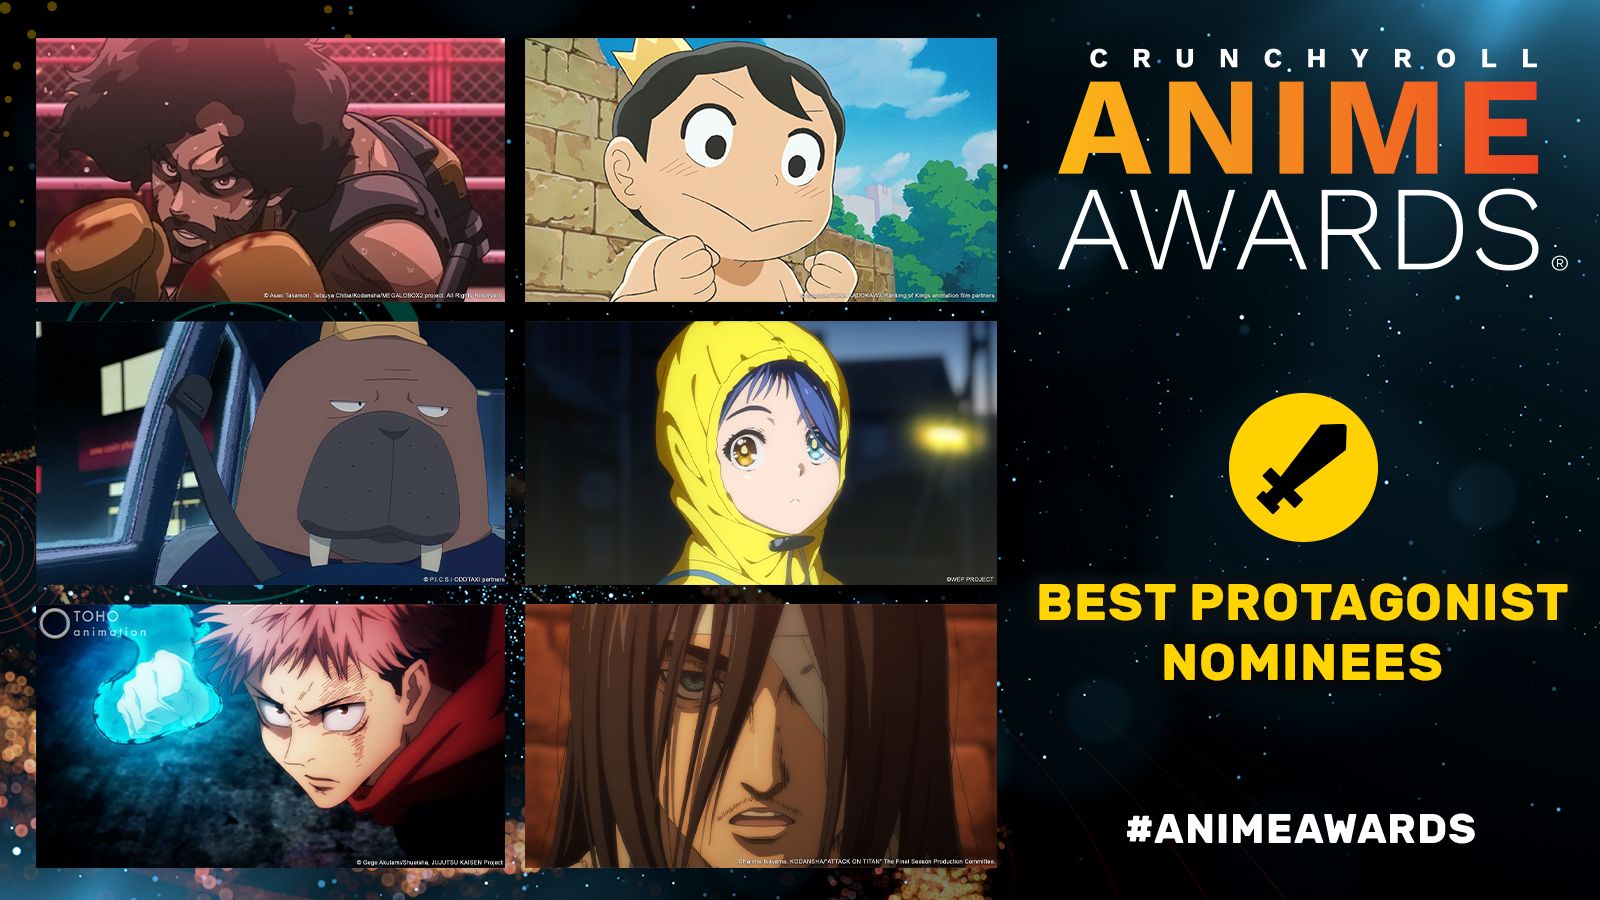 Made in Abyss” Wins Anime Awards 2017 by Crunchyroll – “My Hero Academia”  Wins many other awards – Around Akiba